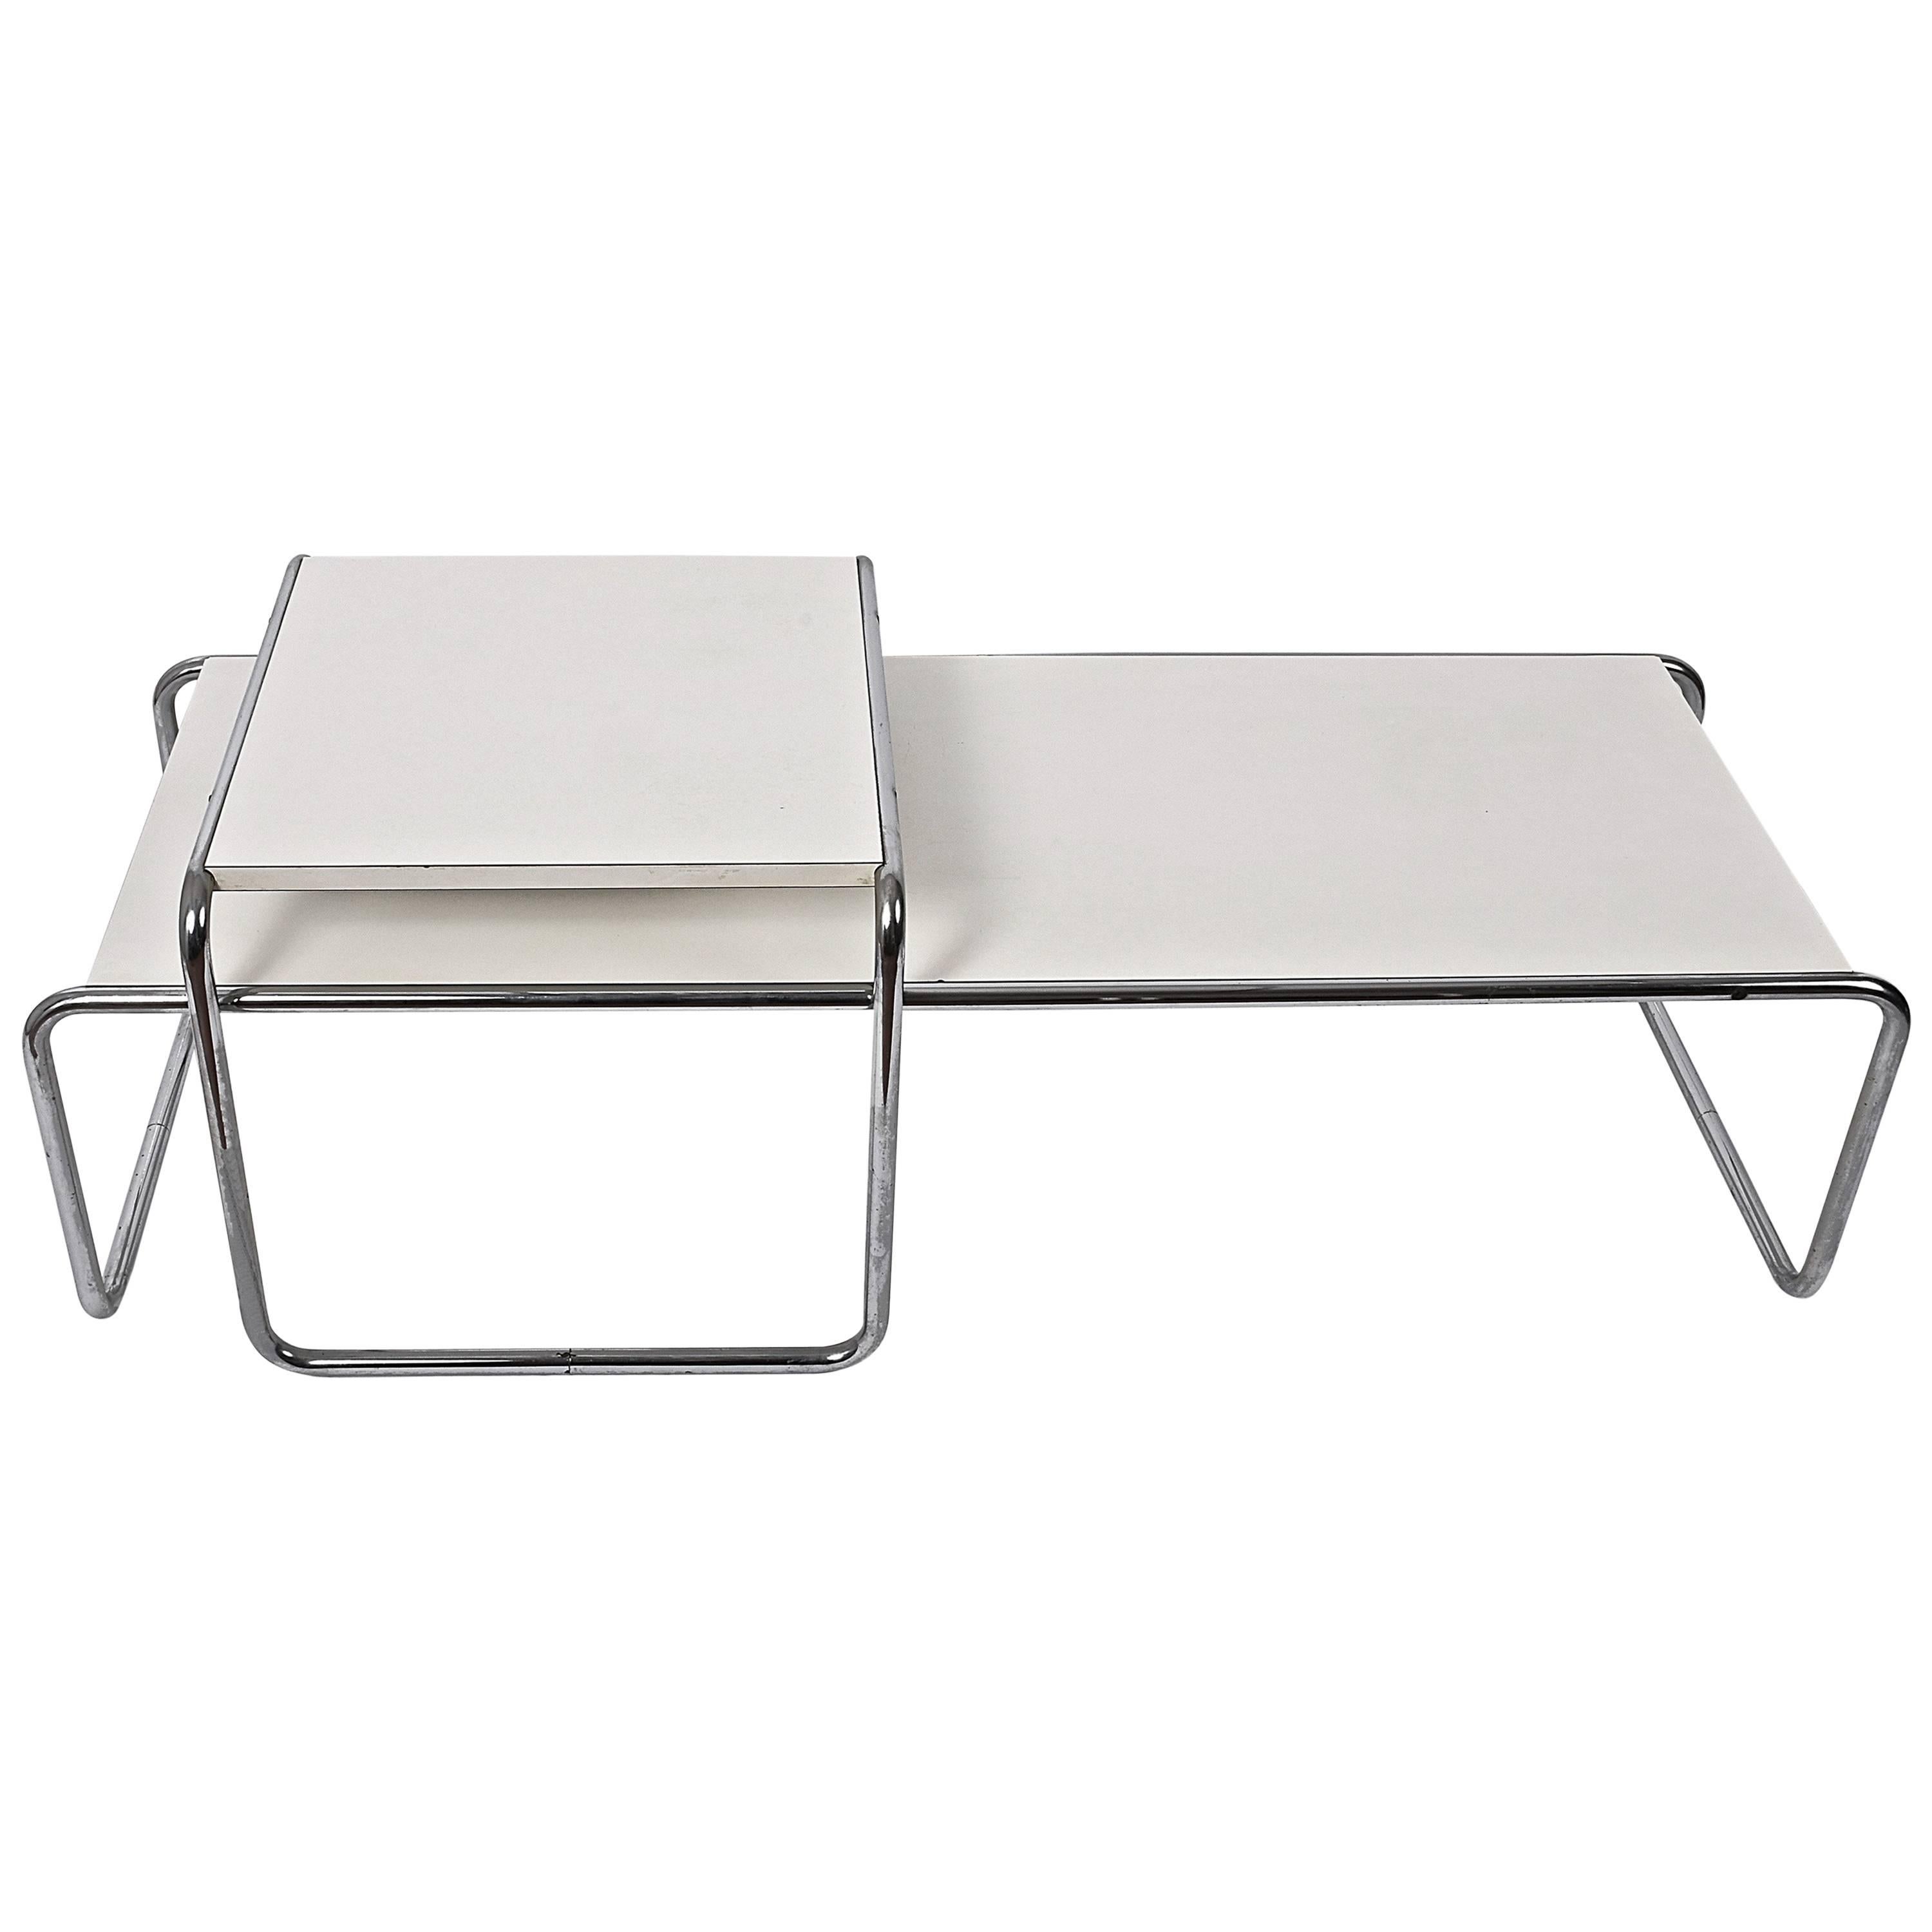 Marcel Breuer White Laminated Wood and Steel 'Laccio' Side Table, Bauhaus